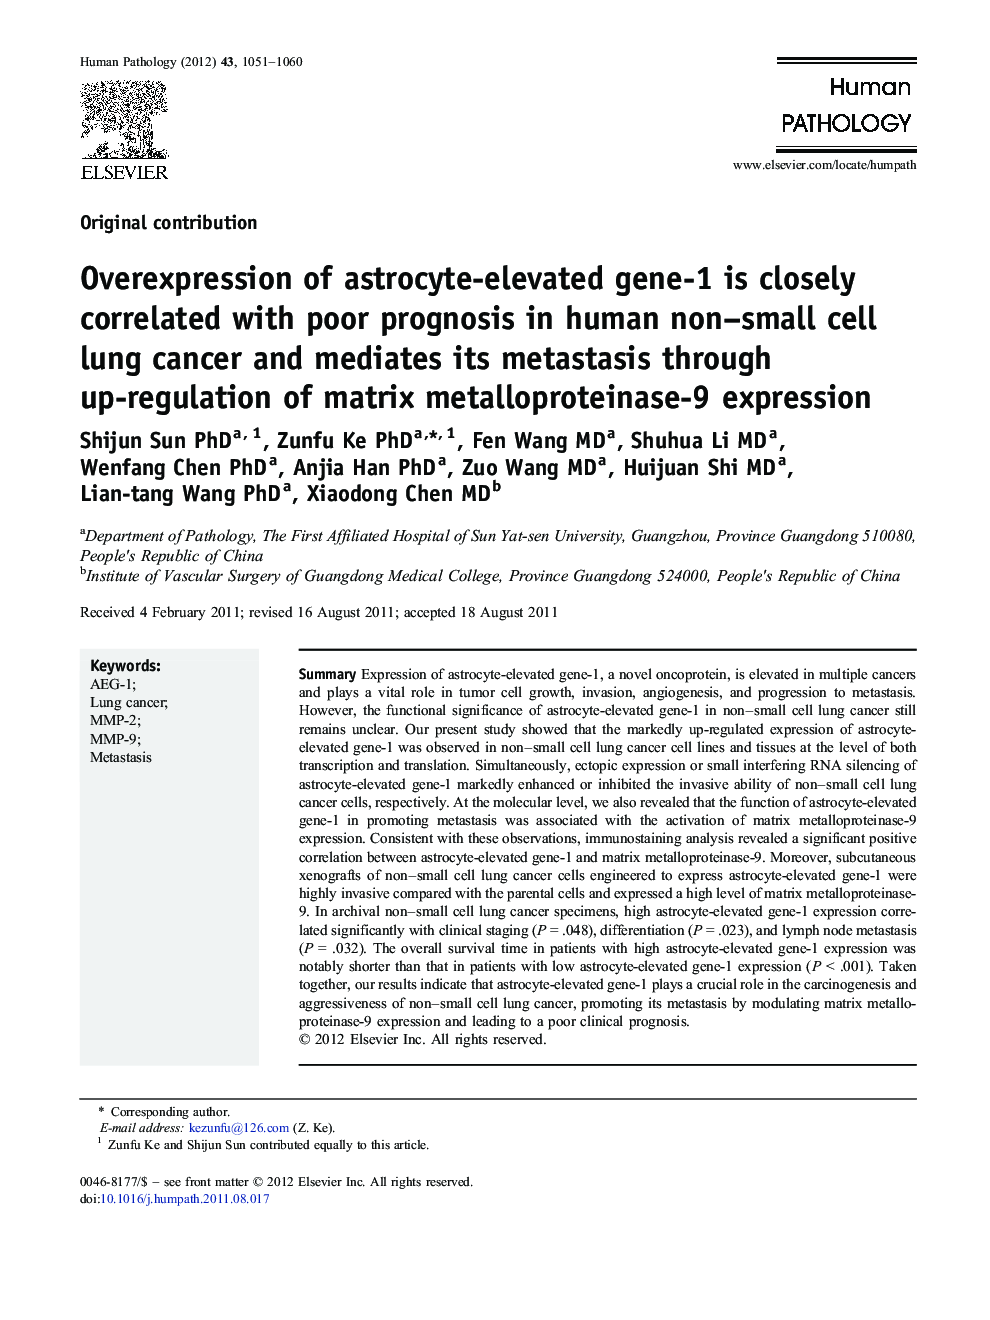 Overexpression of astrocyte-elevated gene-1 is closely correlated with poor prognosis in human non–small cell lung cancer and mediates its metastasis through up-regulation of matrix metalloproteinase-9 expression